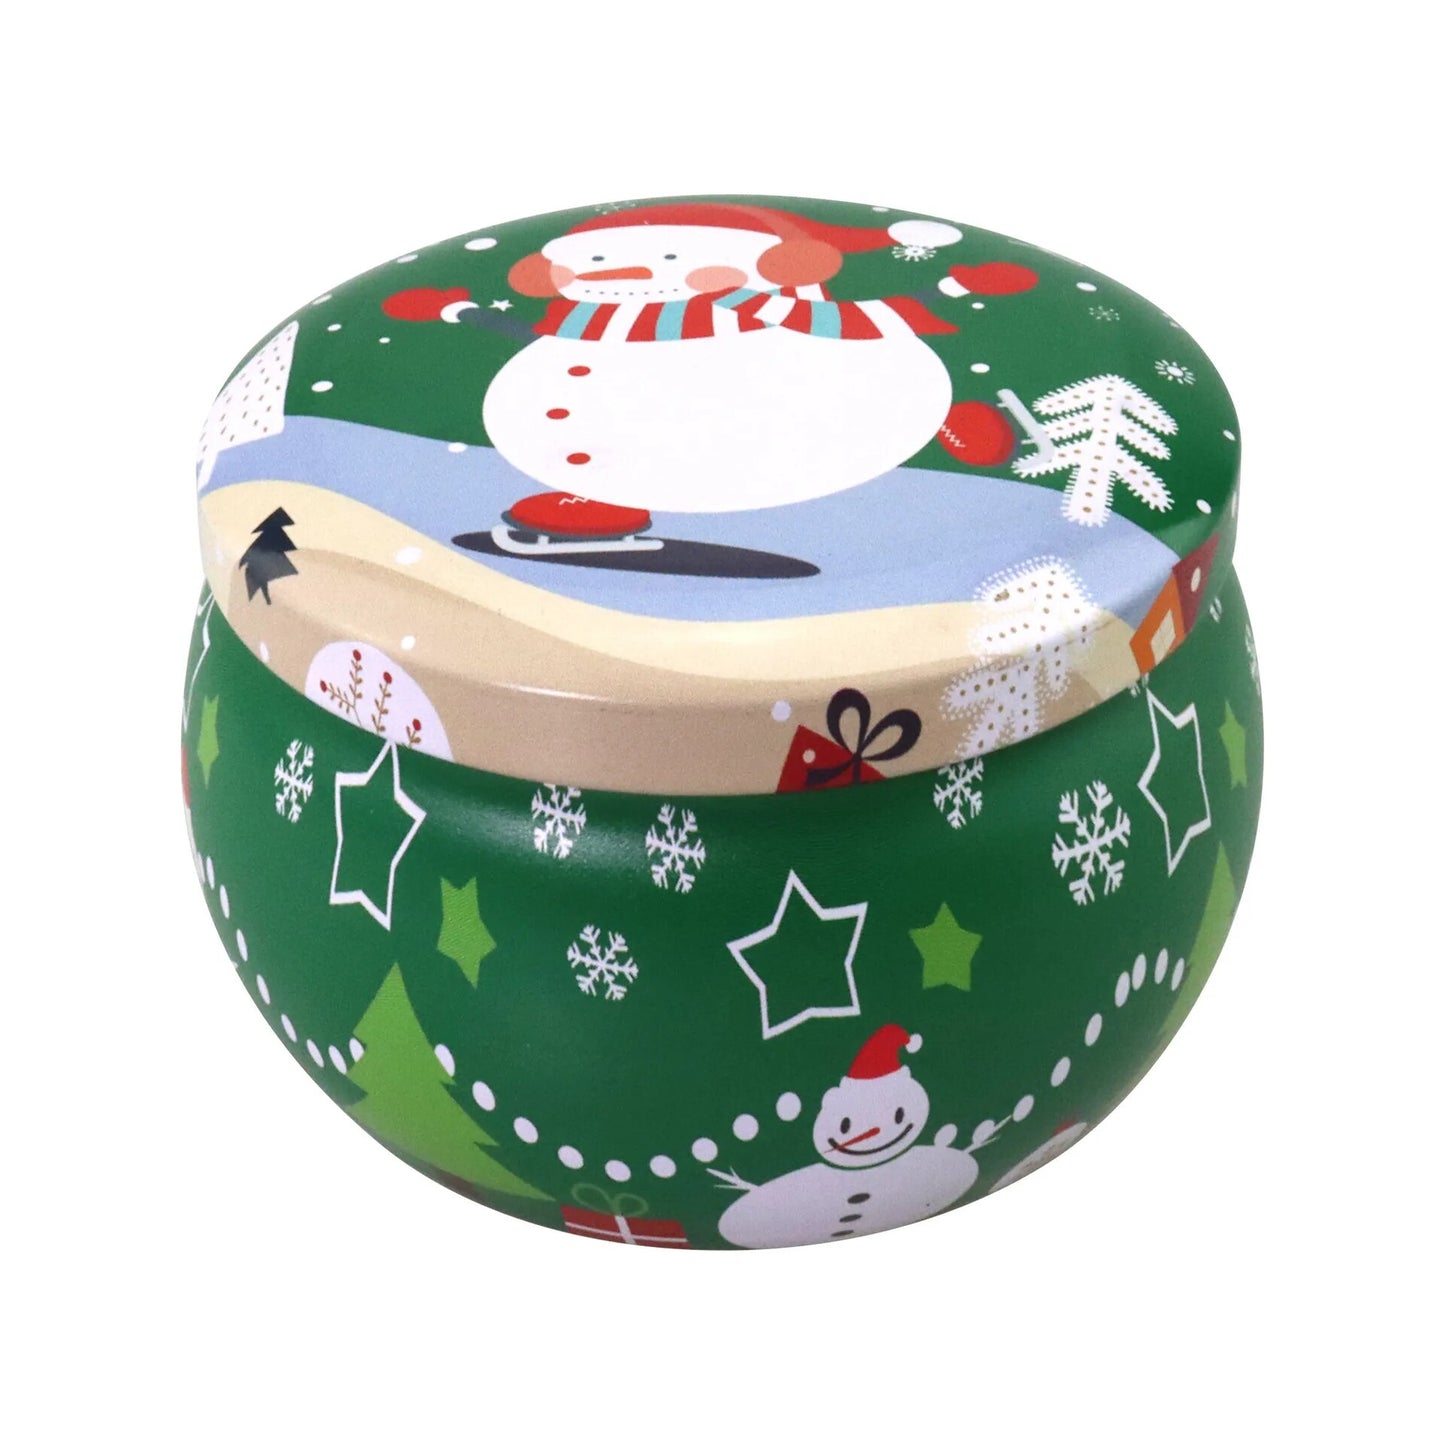 4Pcs Christmas Metal Tin Jars Coffee Tea Spice Candy Jewelry Storage Case Candle Making Containers Decorations Boxes 4.4OZ